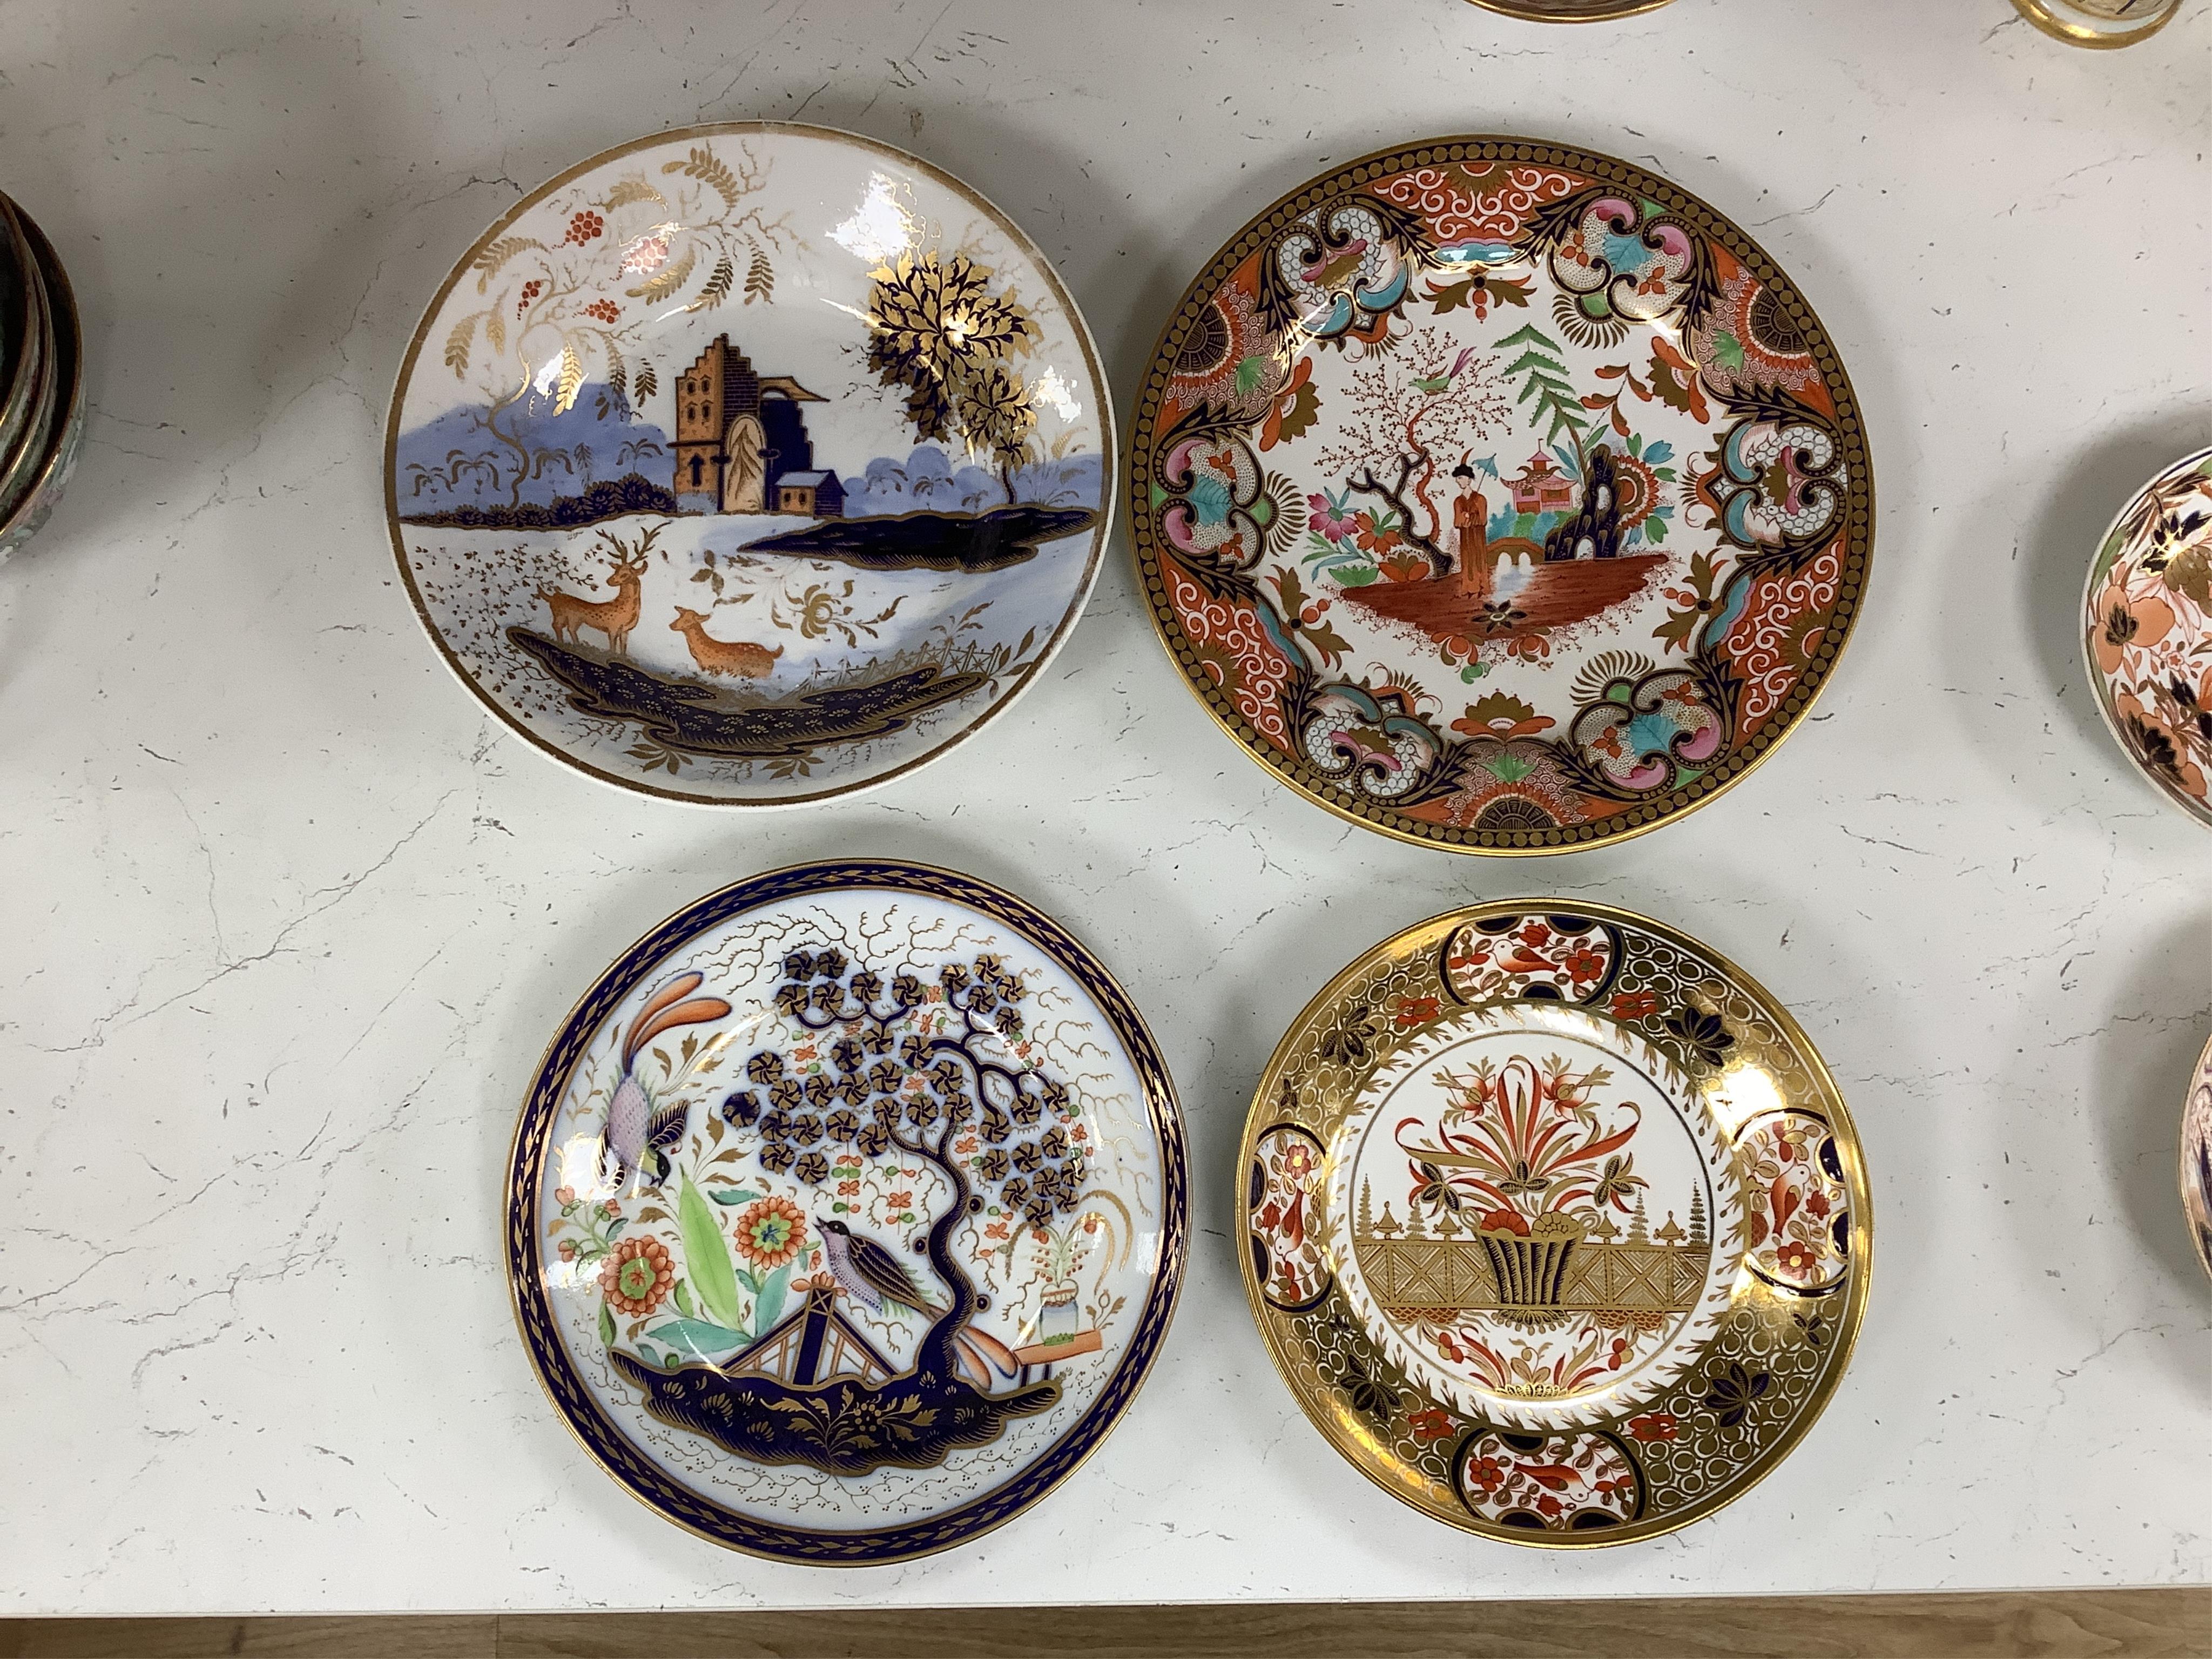 Sixteen mixed items of 1800-1820 English porcelain tableware, to include: three sucriers and covers, an oval ornately decorated dish, four saucer dishes, a candle holder, three spill vases and four saucers